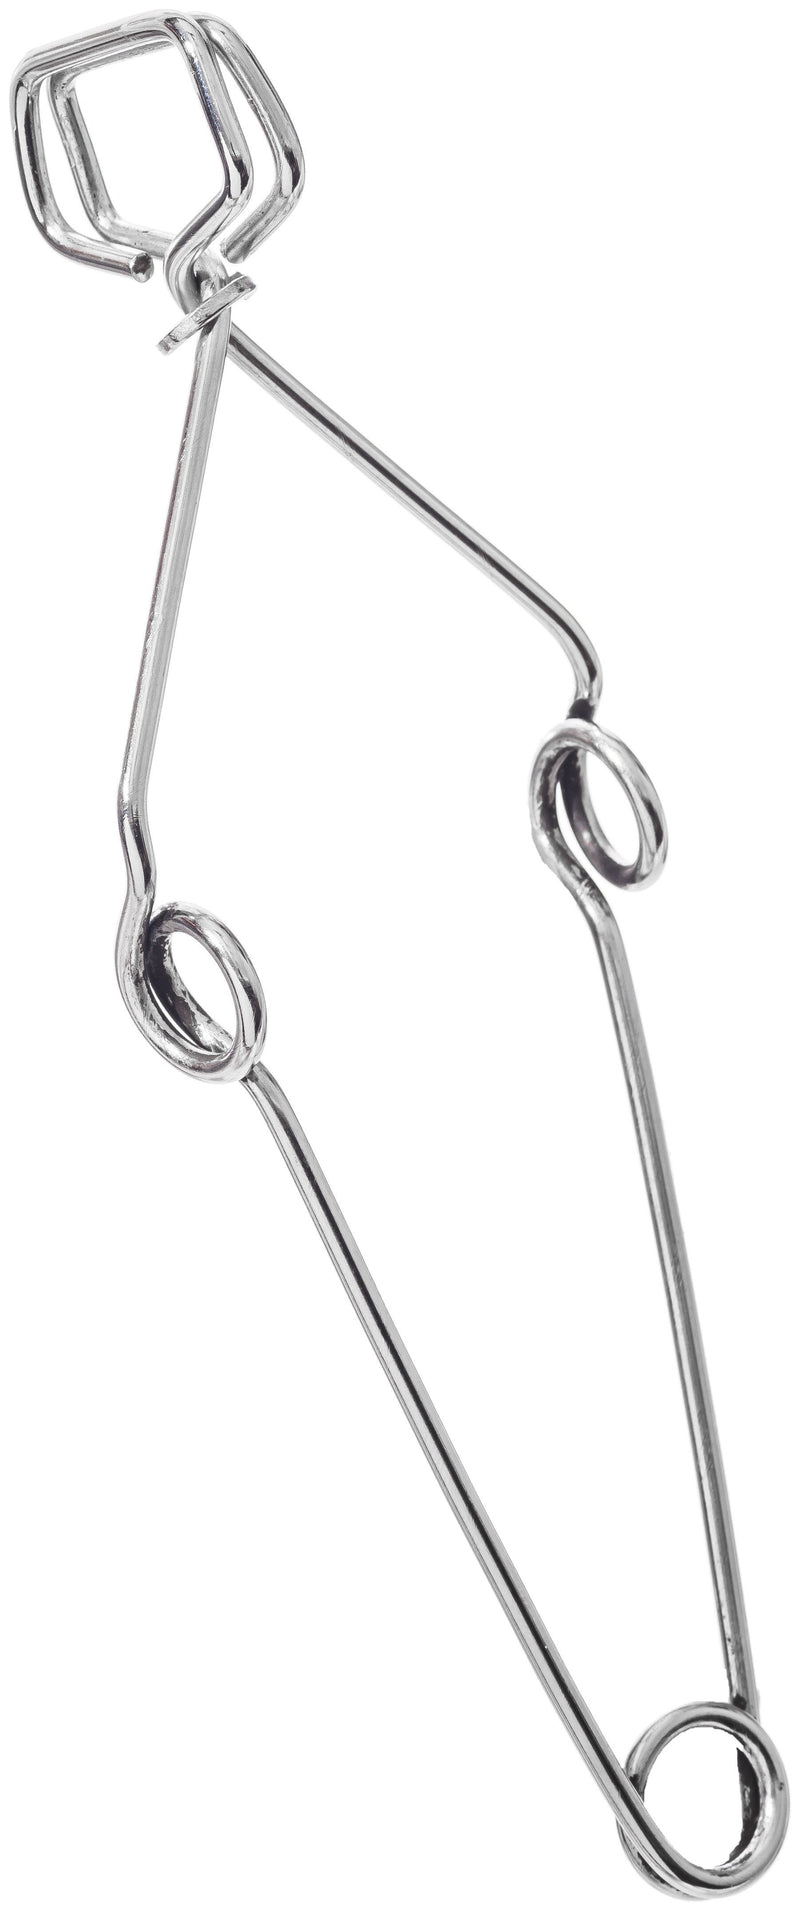 WIRE TONGS